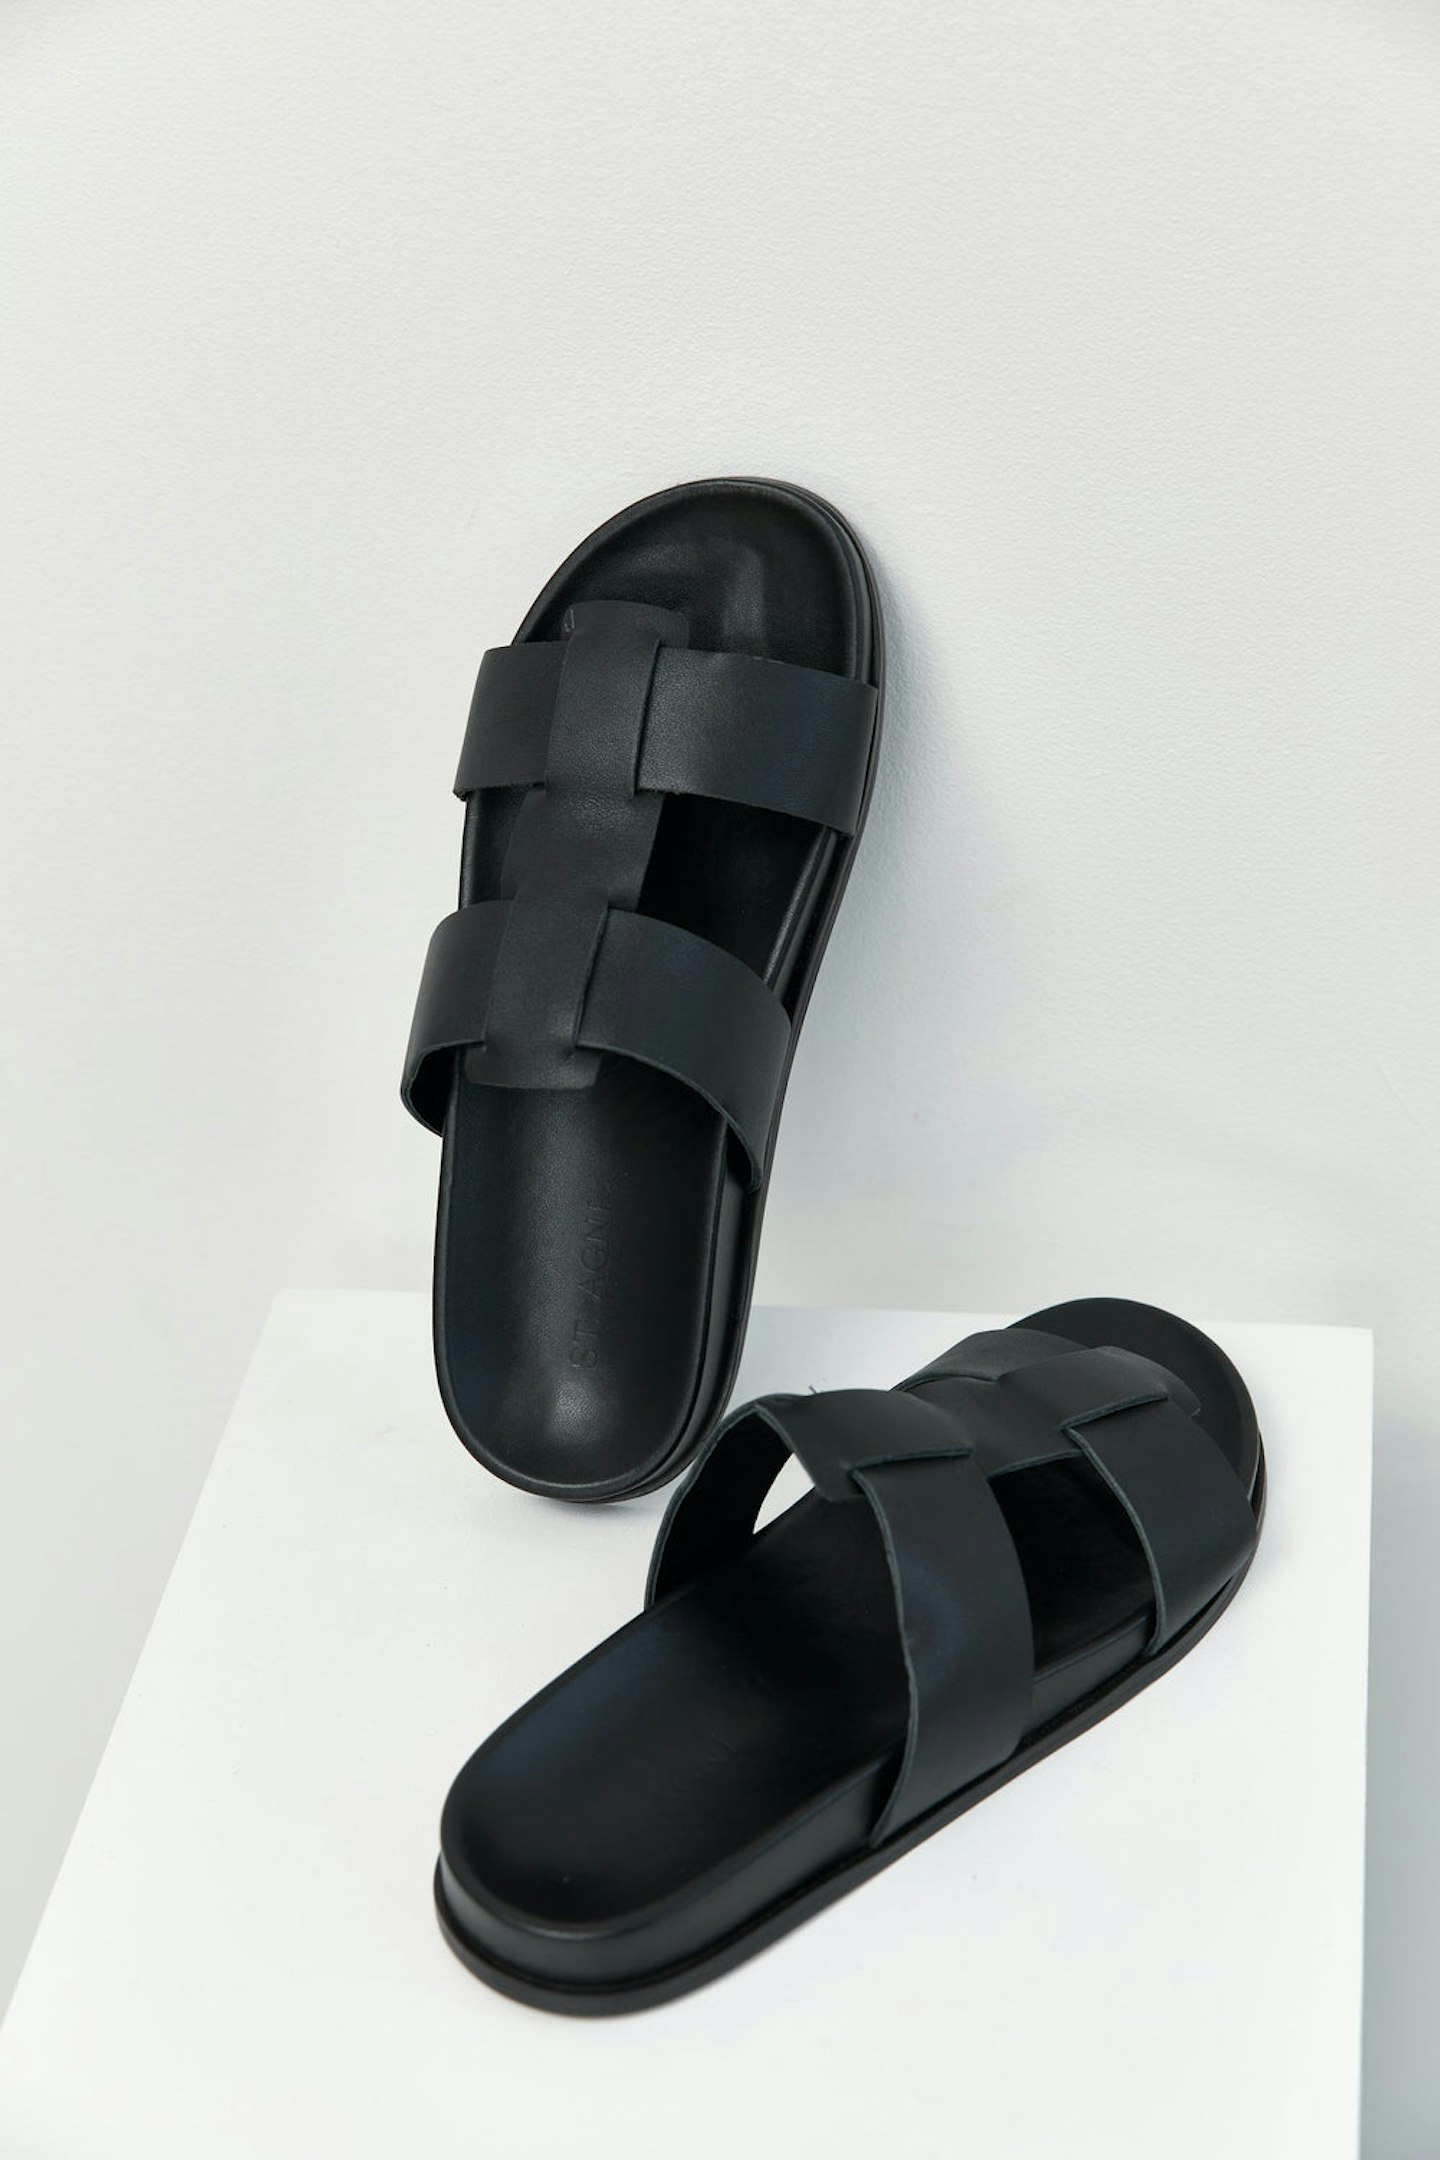 lunchtime shop Tuesday - St. Agni, Black Axel Leather Sandals, £185